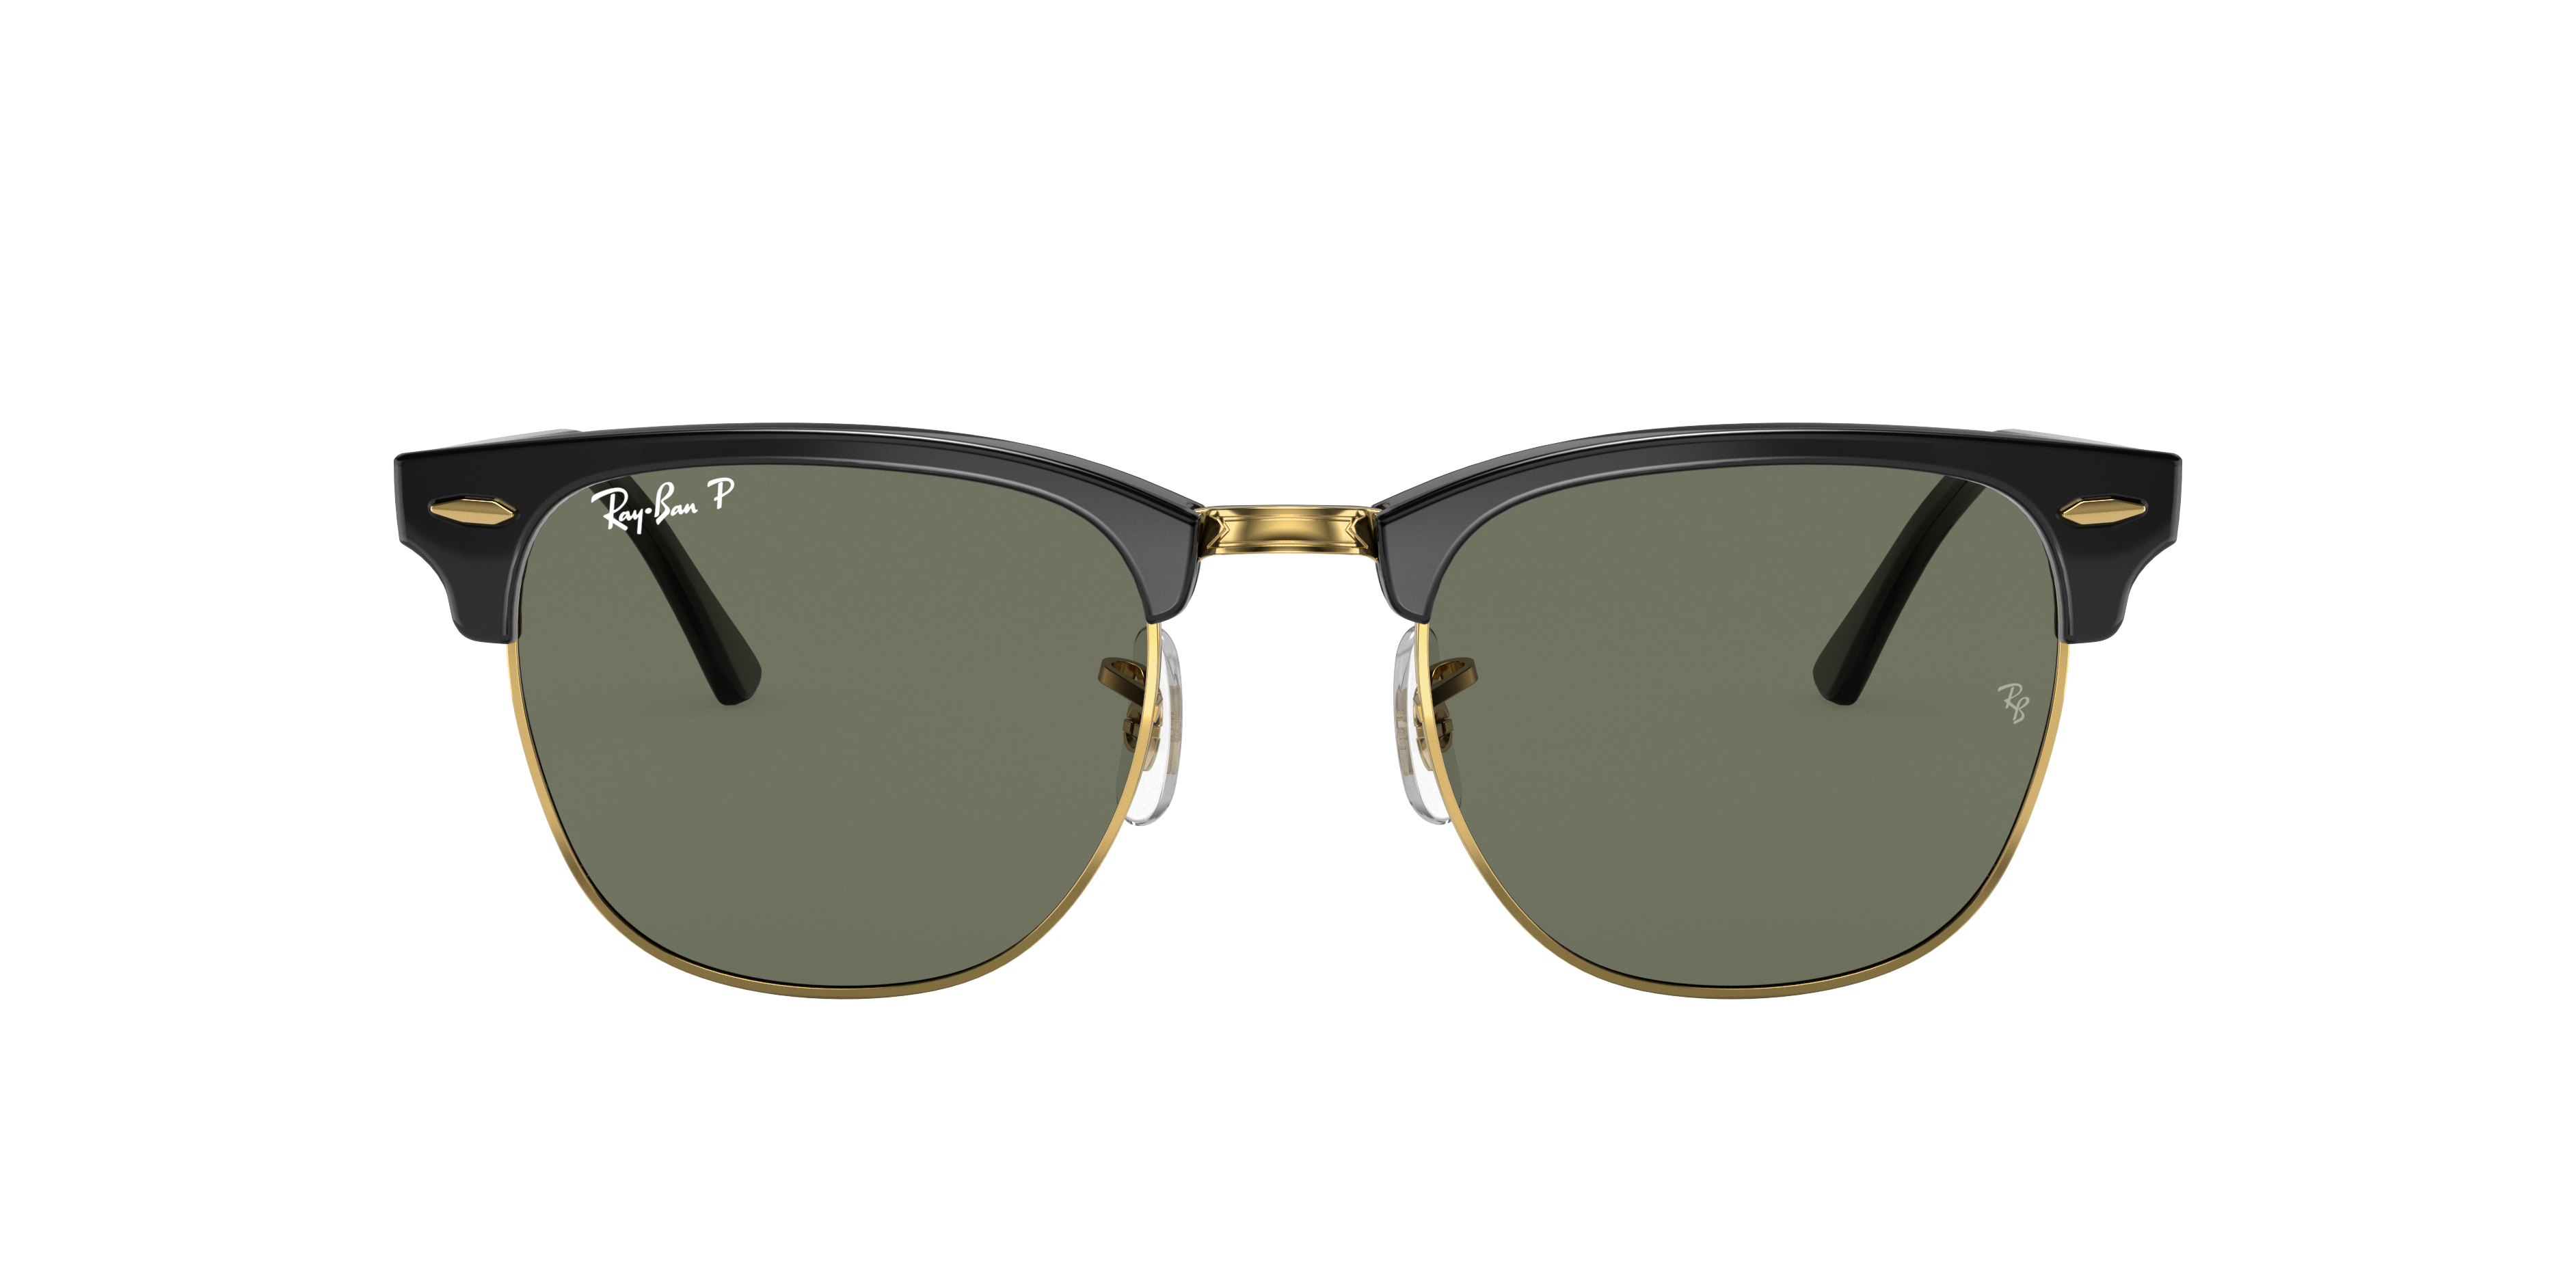 discount on ray bans